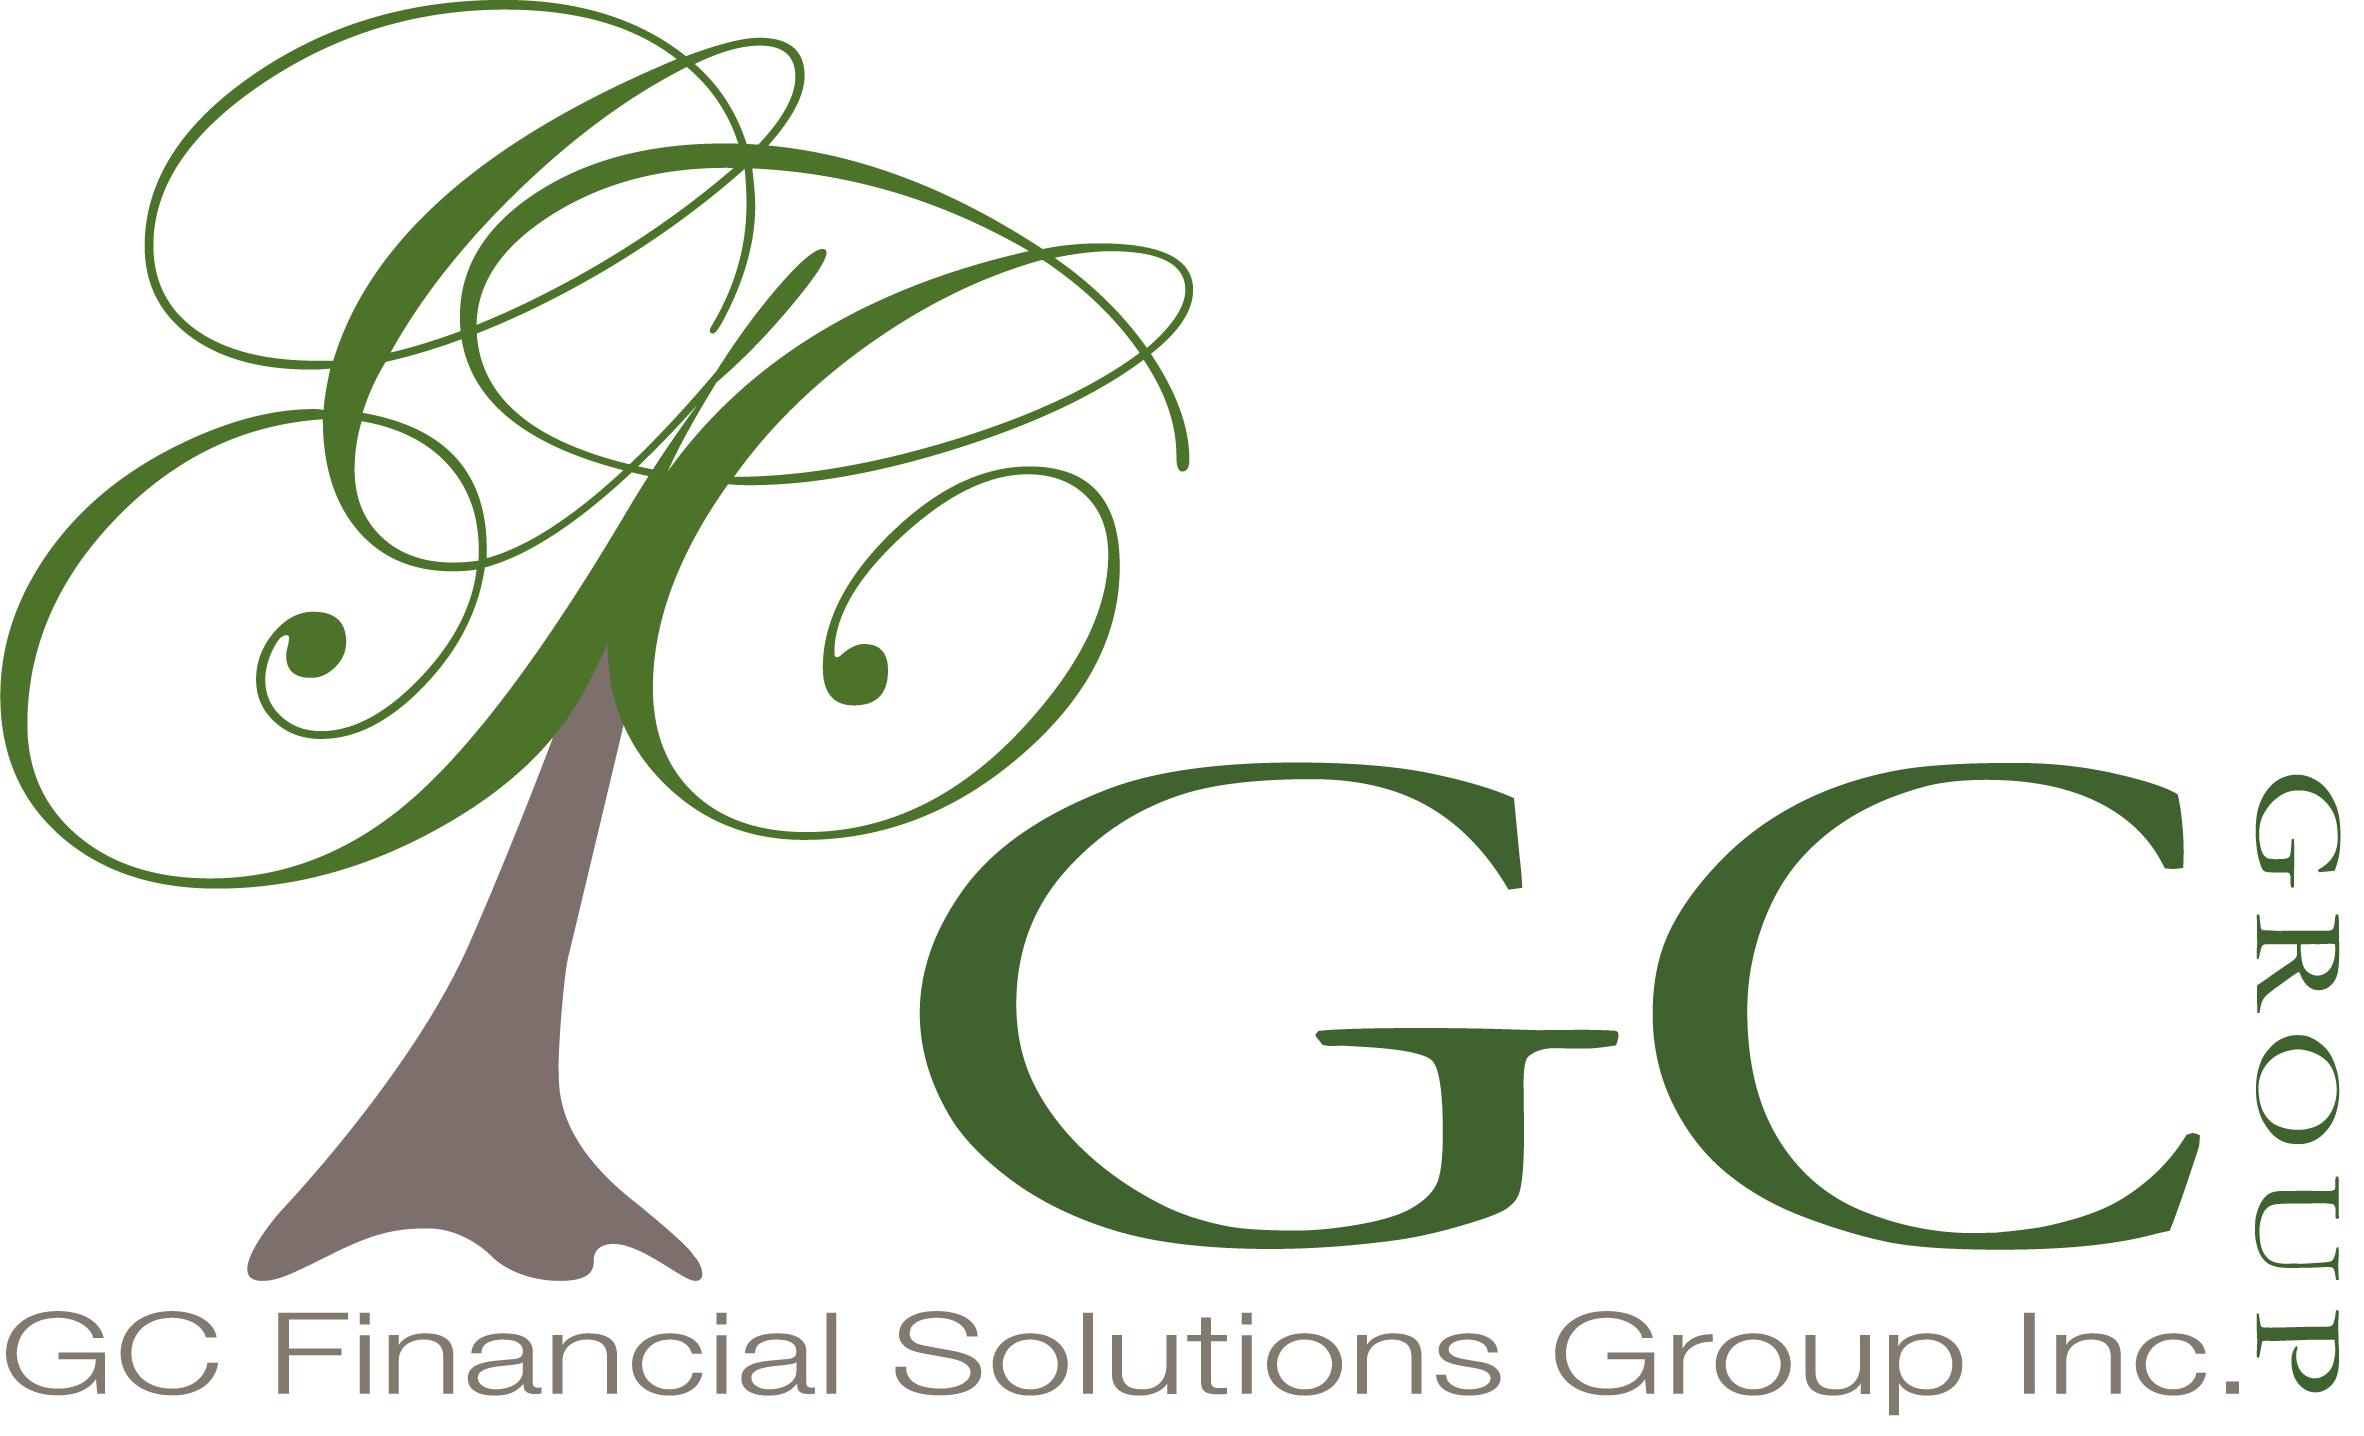 GC Financial Solutions Group Inc.